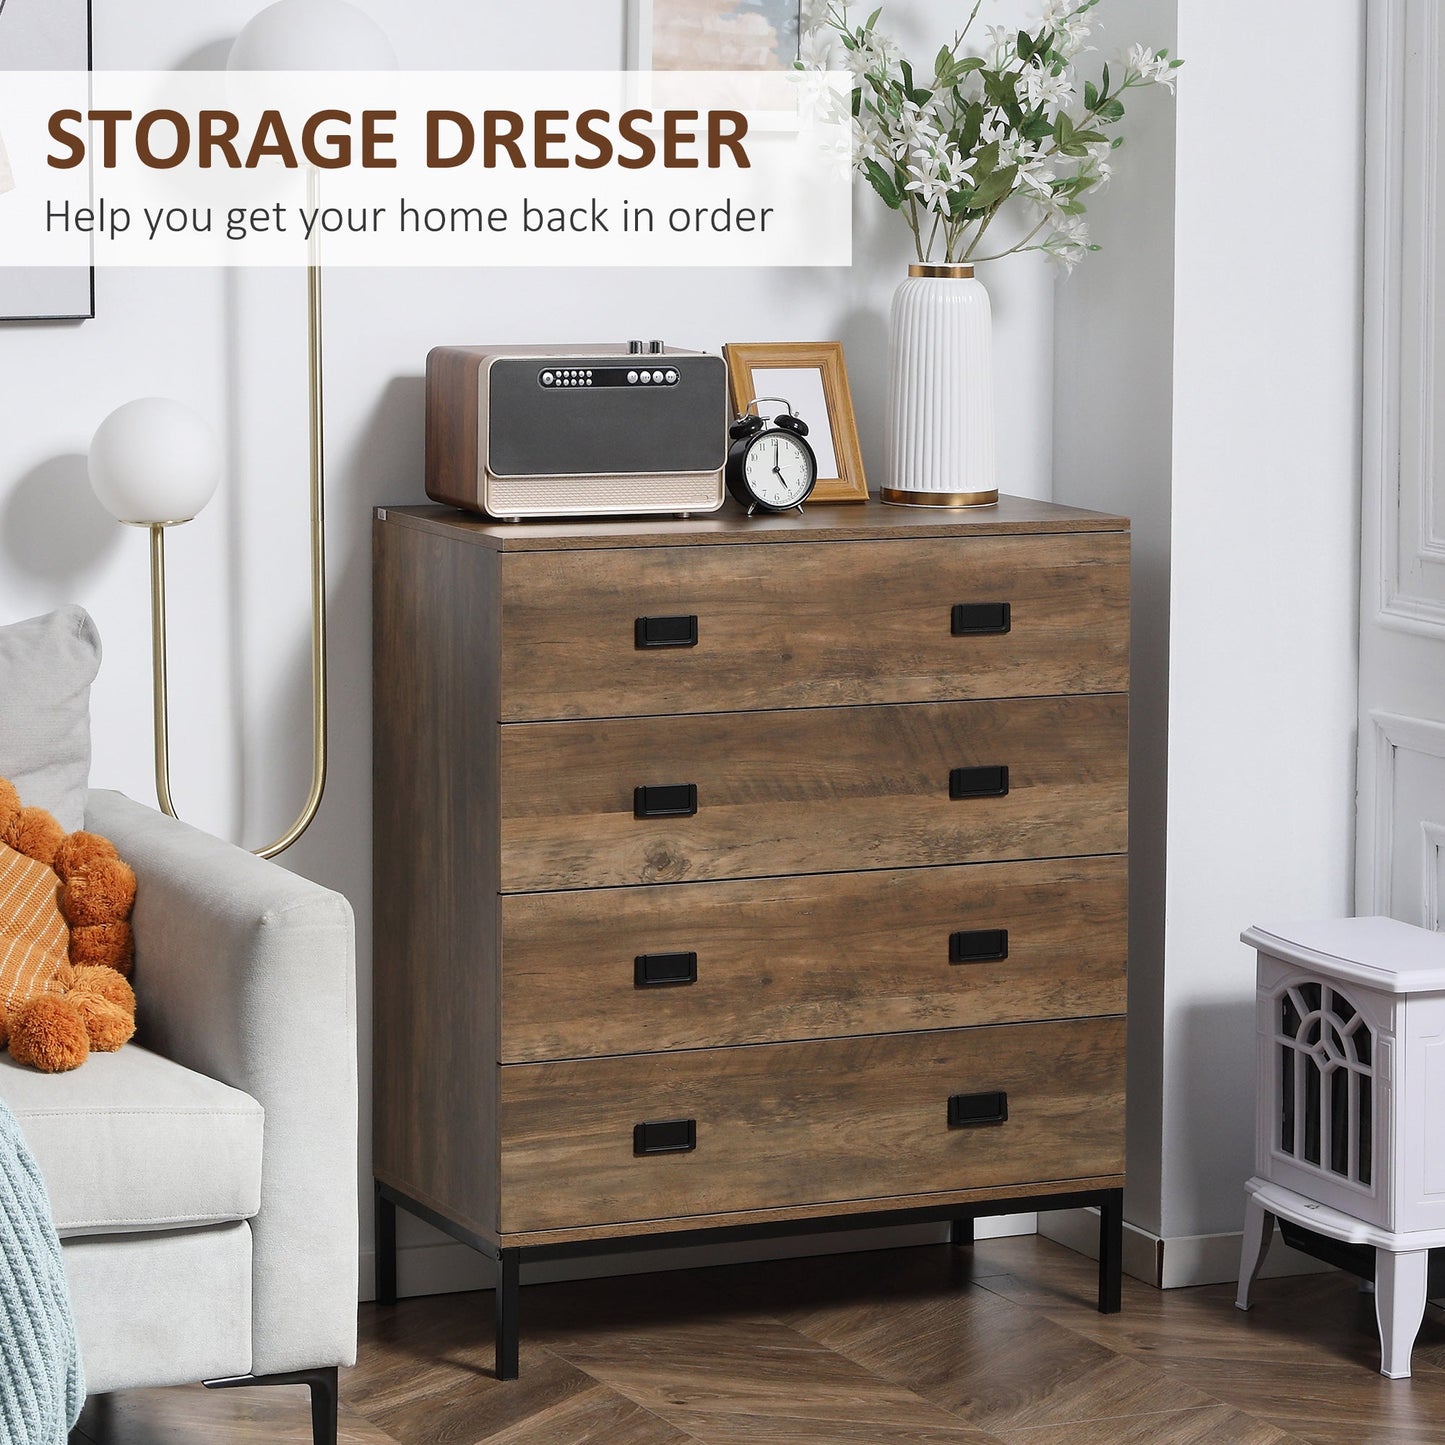 4-Drawer Organiser Unit with Metal Frame and Wood-Effect Design - Brown